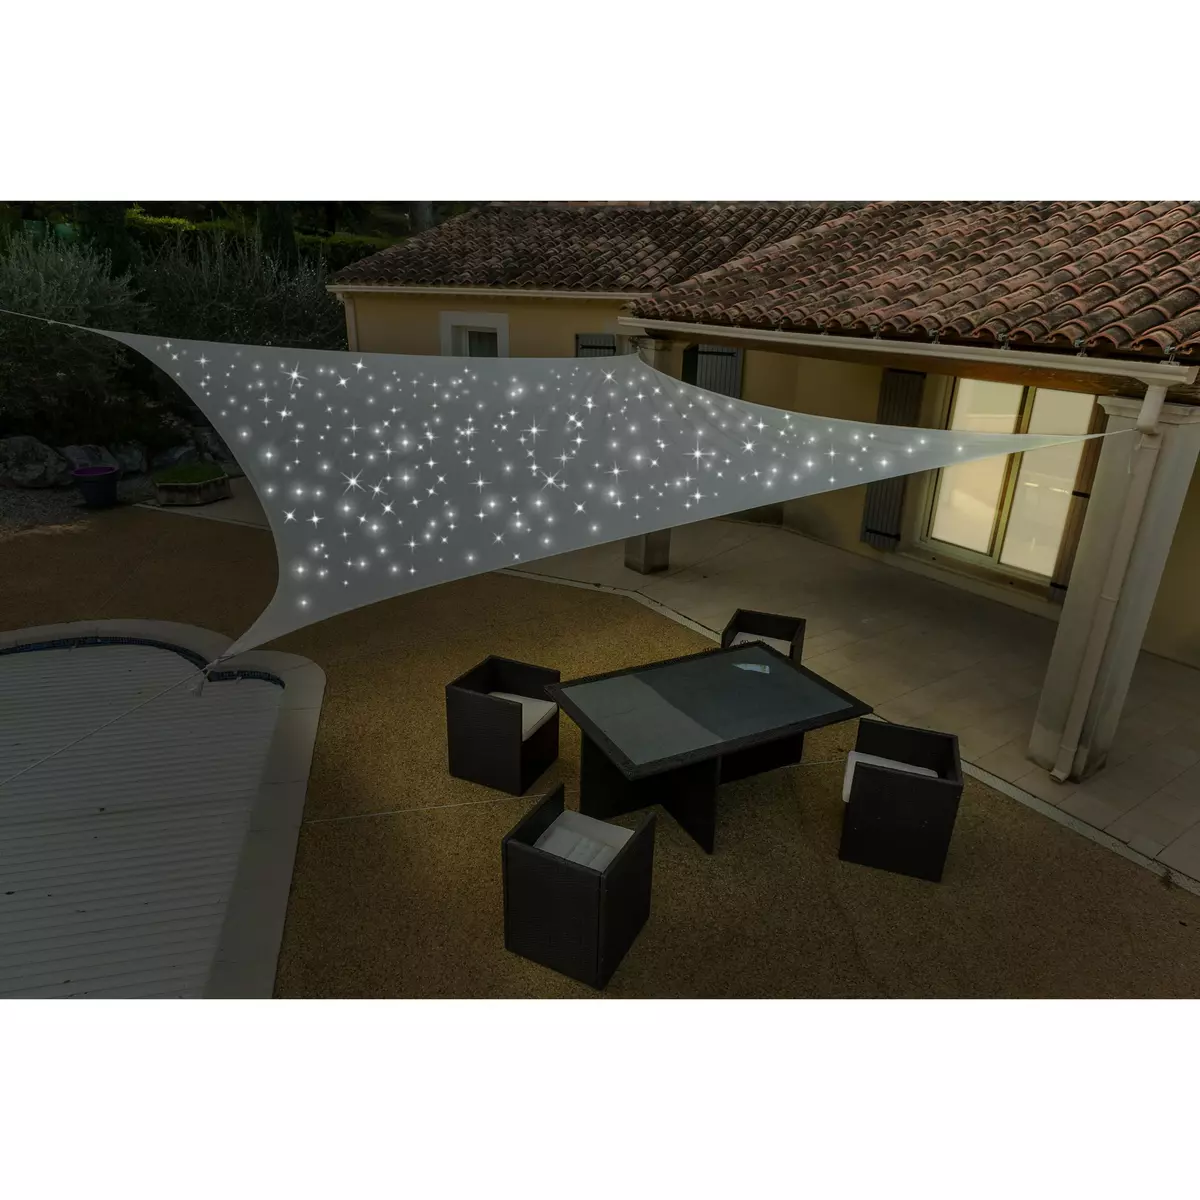  Voile d'ombrage solaire 200 Led 3x4m taupe WERKA PRO